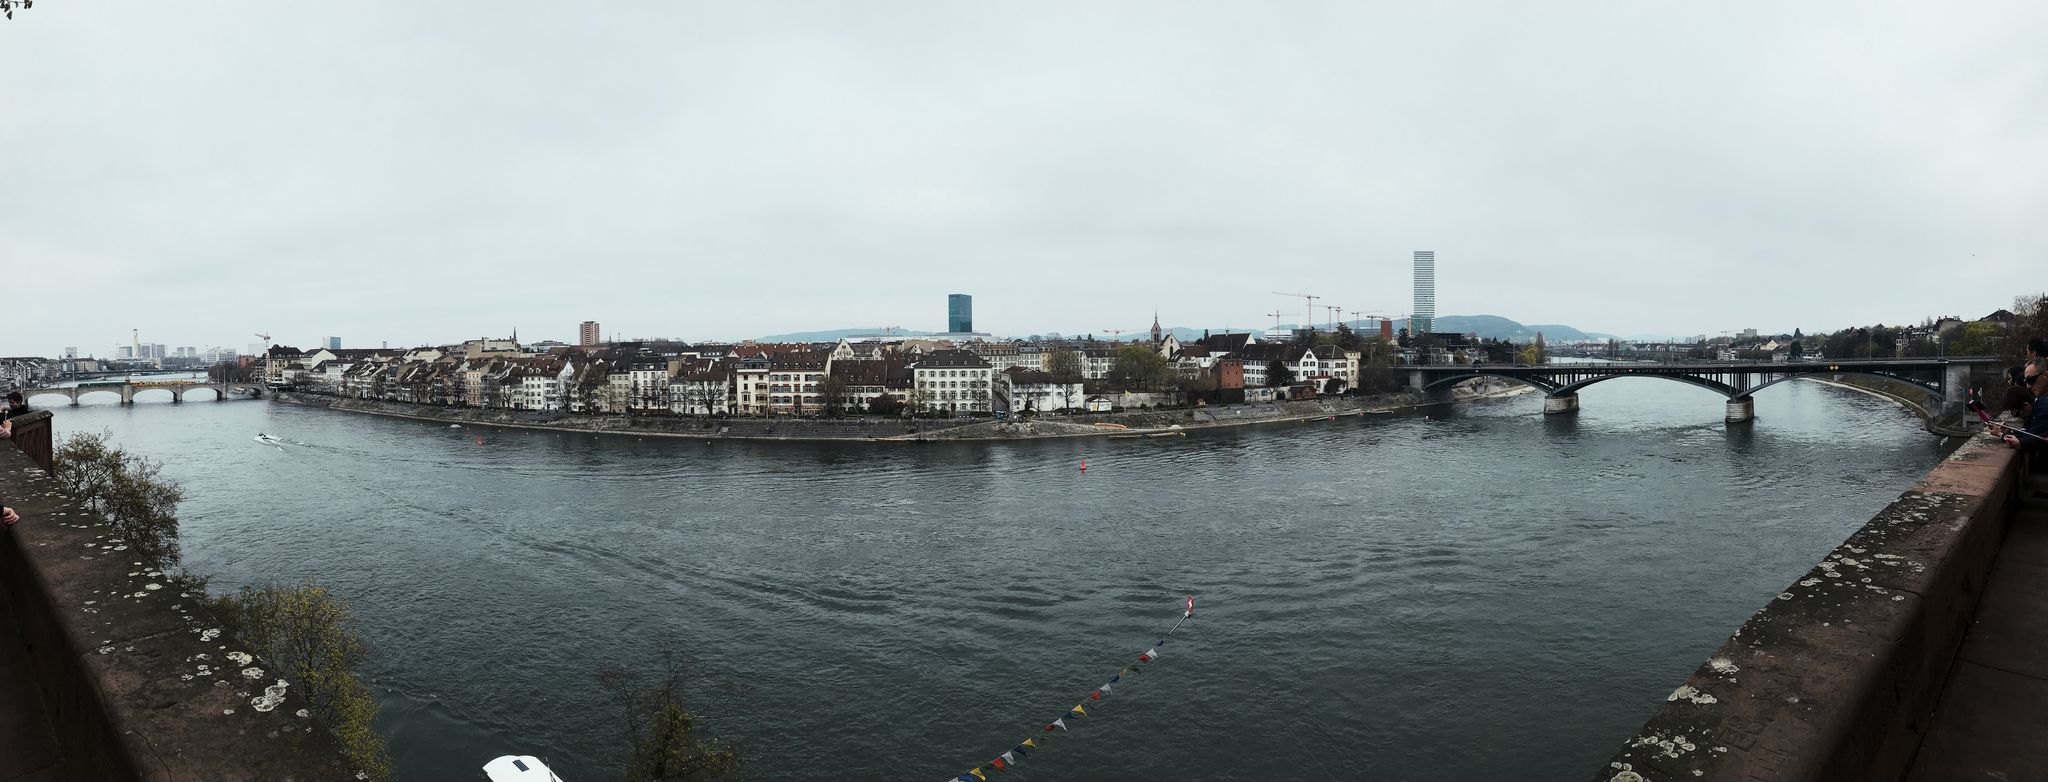 A panorama of the river Rhine, looking across to old buildings.